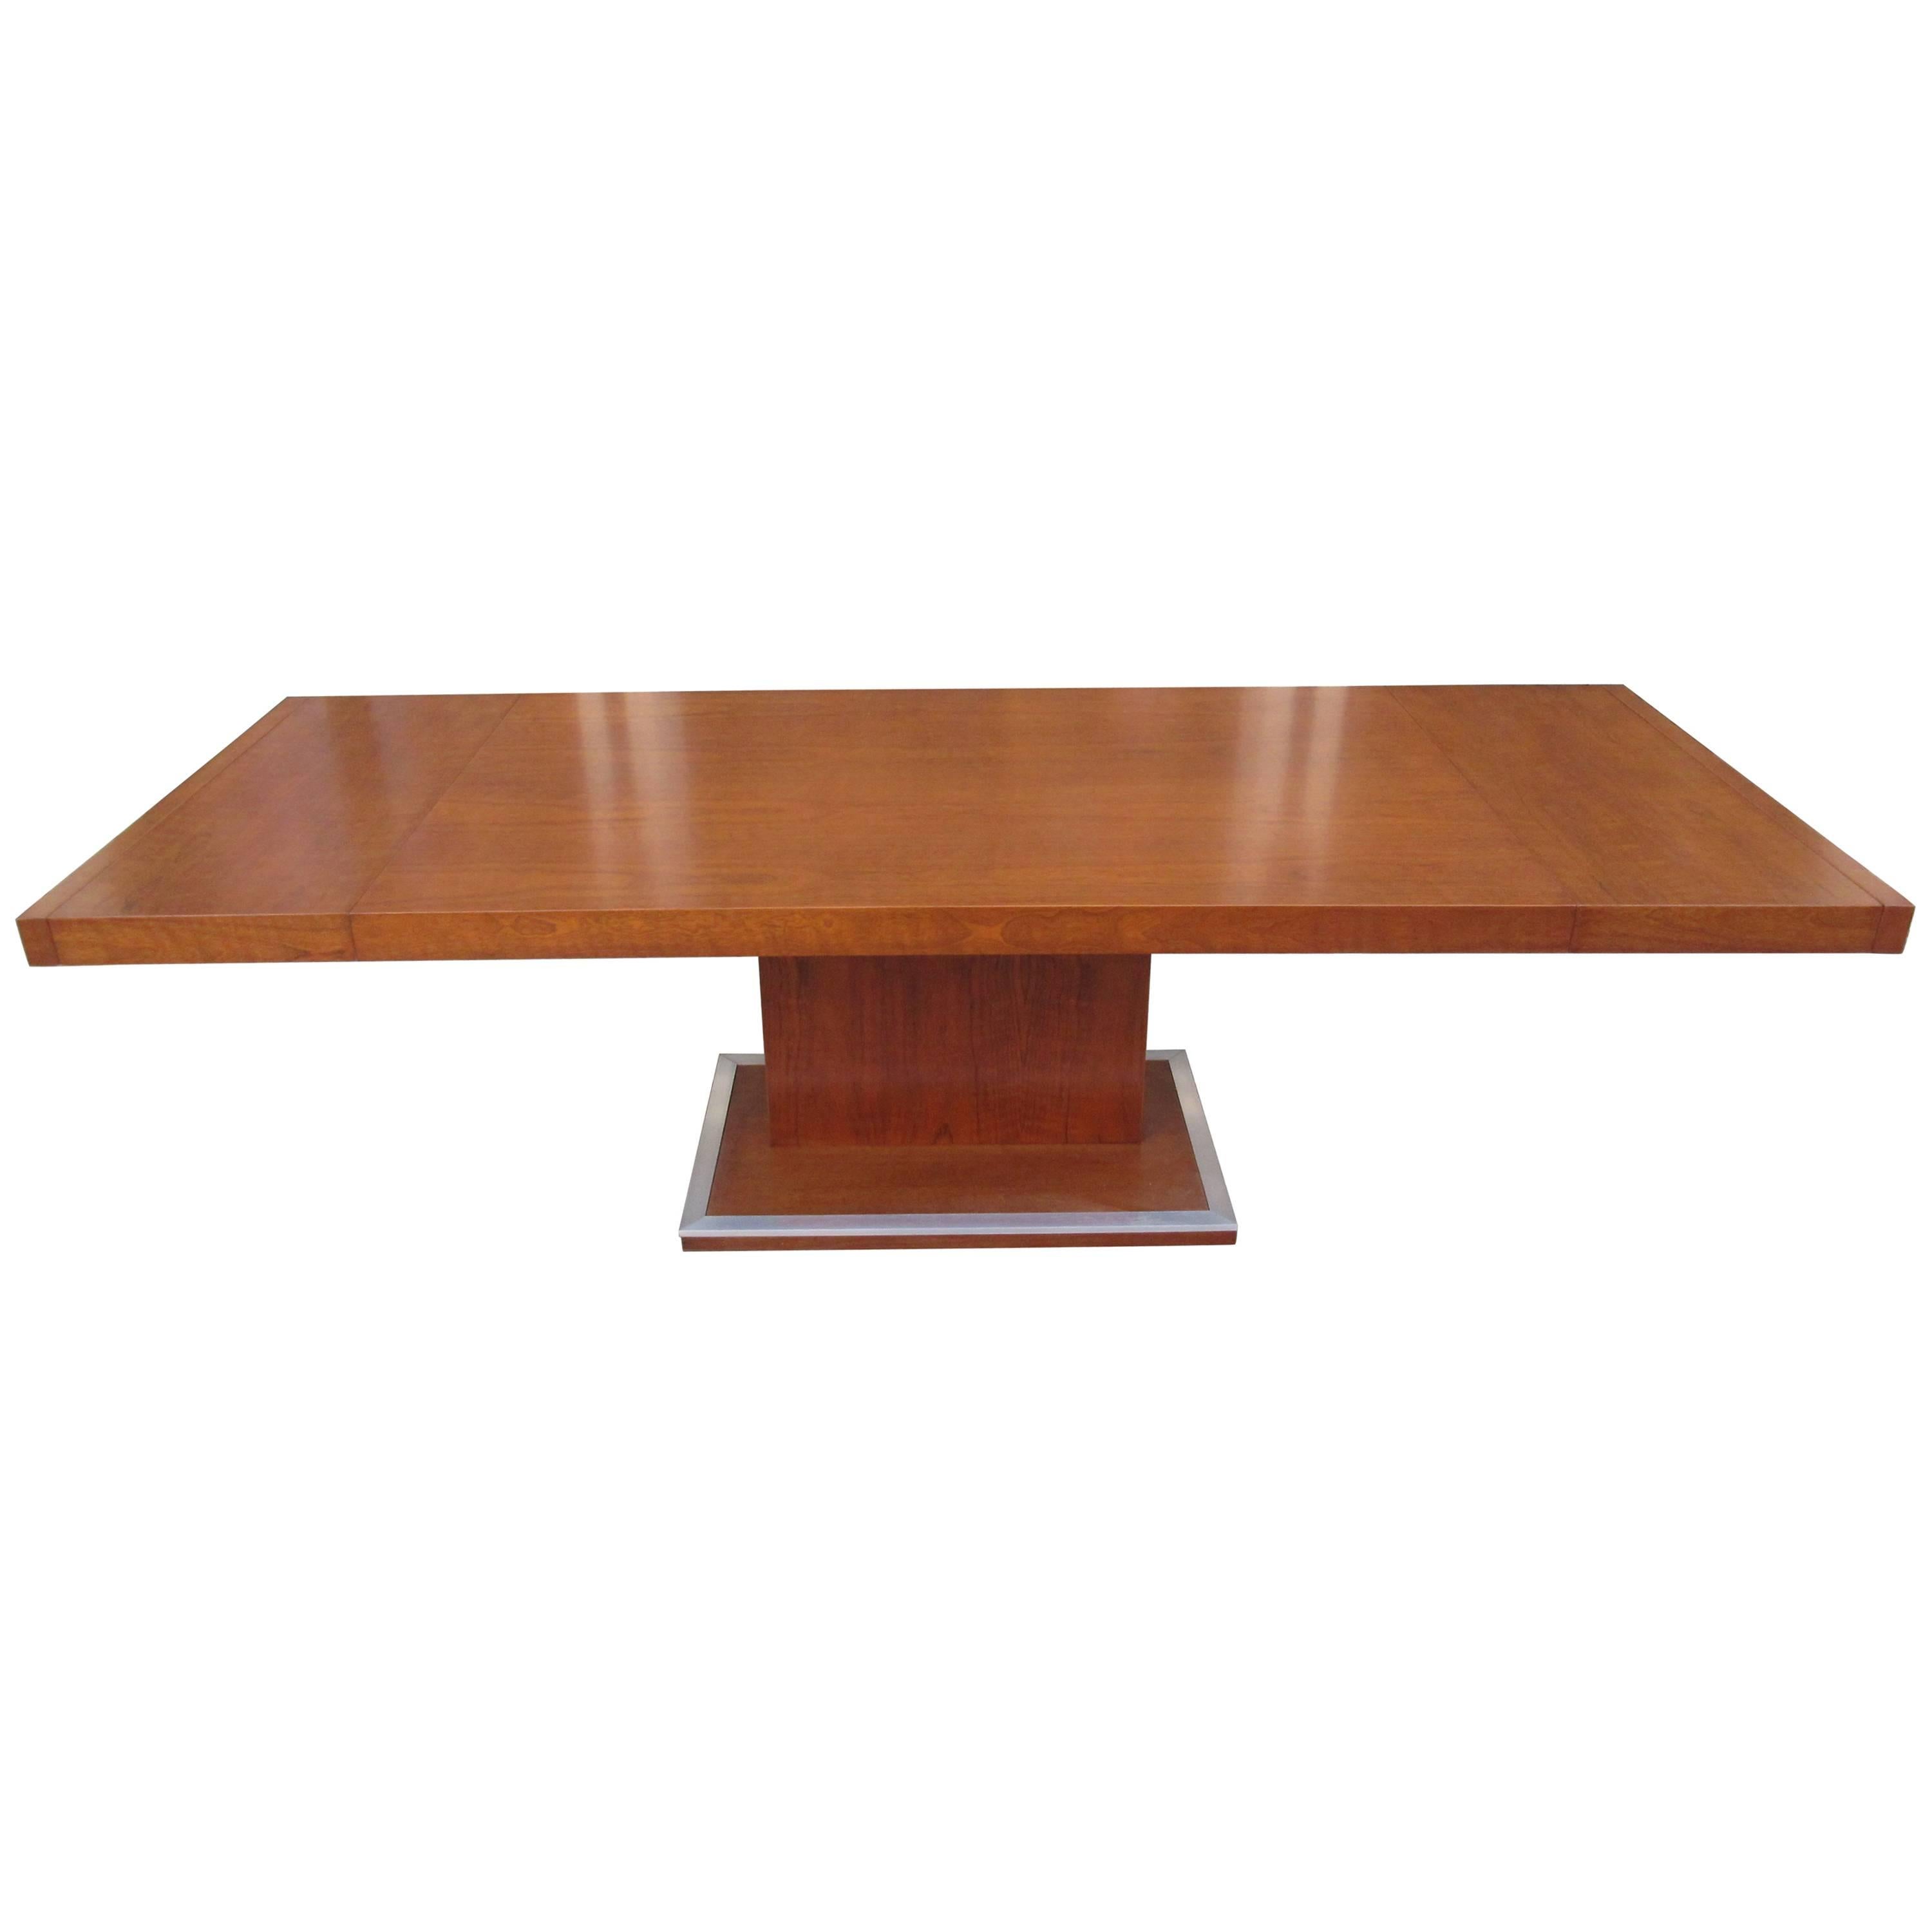 Milo Baughman for Founders Walnut Extension Dining Table